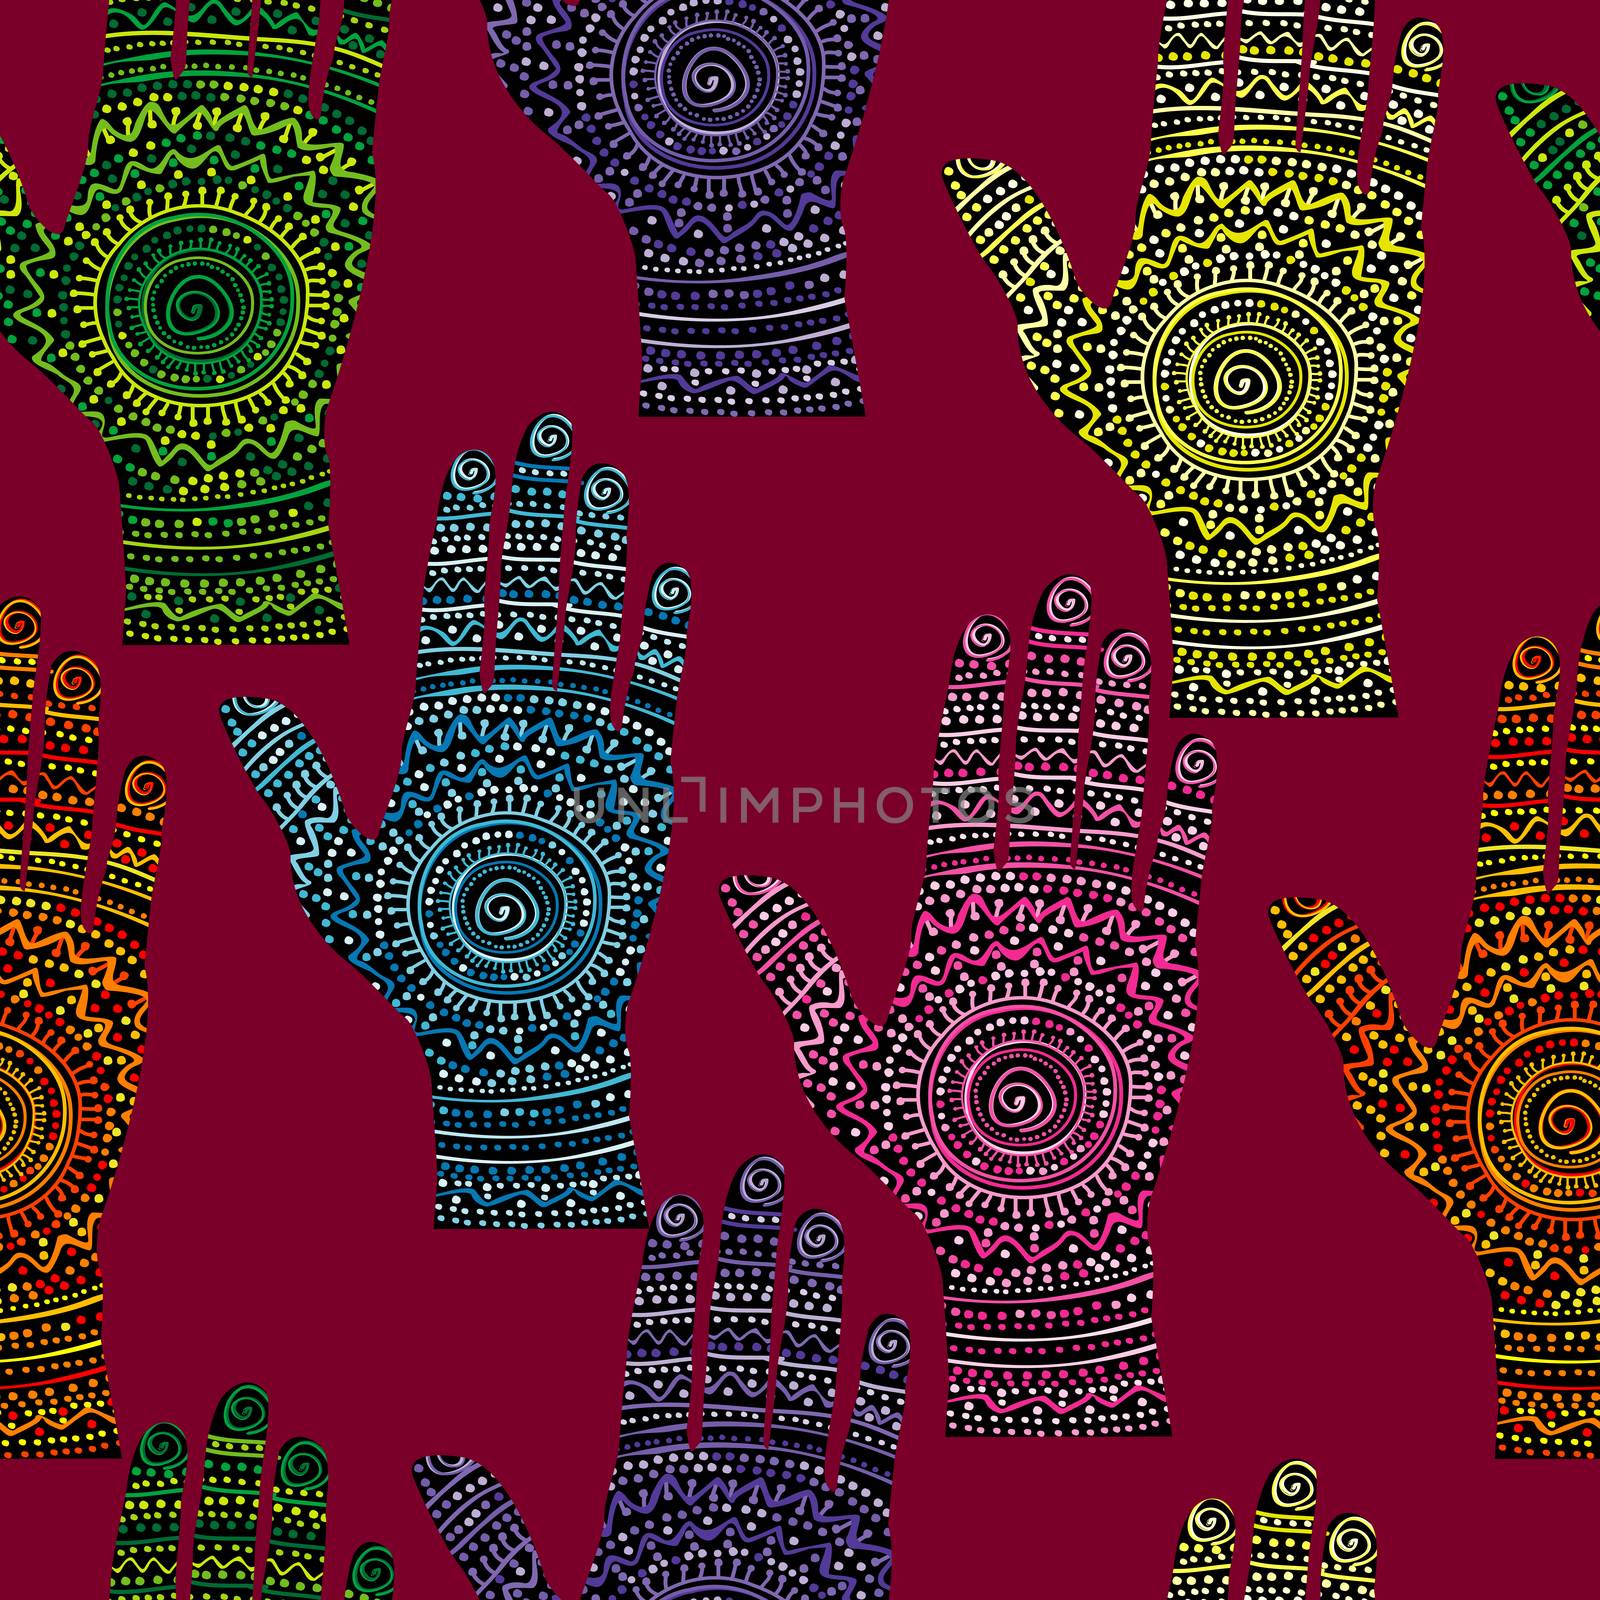 Abstract background with painting hands by hibrida13